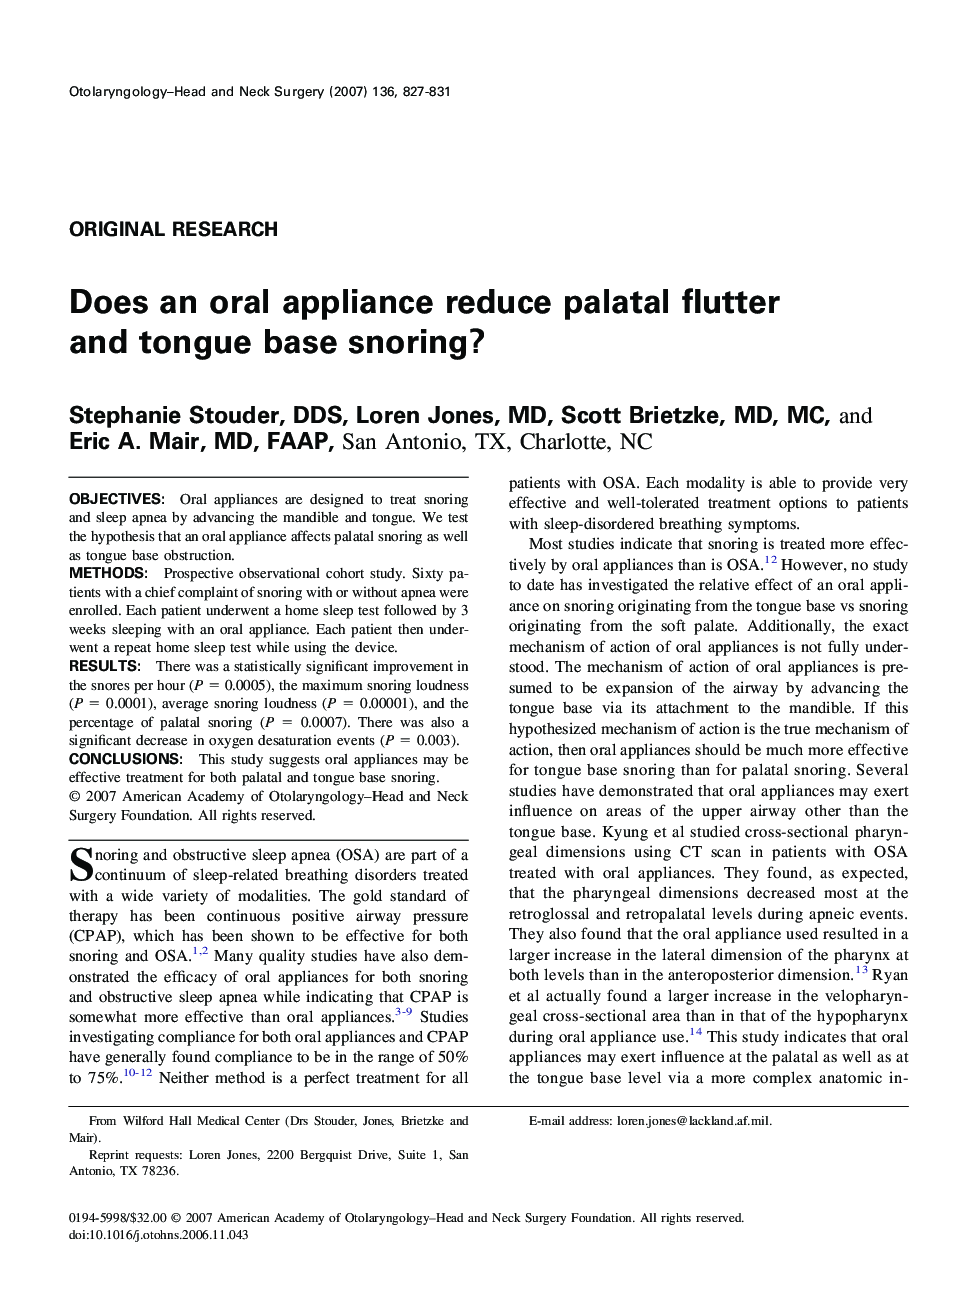 Does an oral appliance reduce palatal flutter and tongue base snoring?